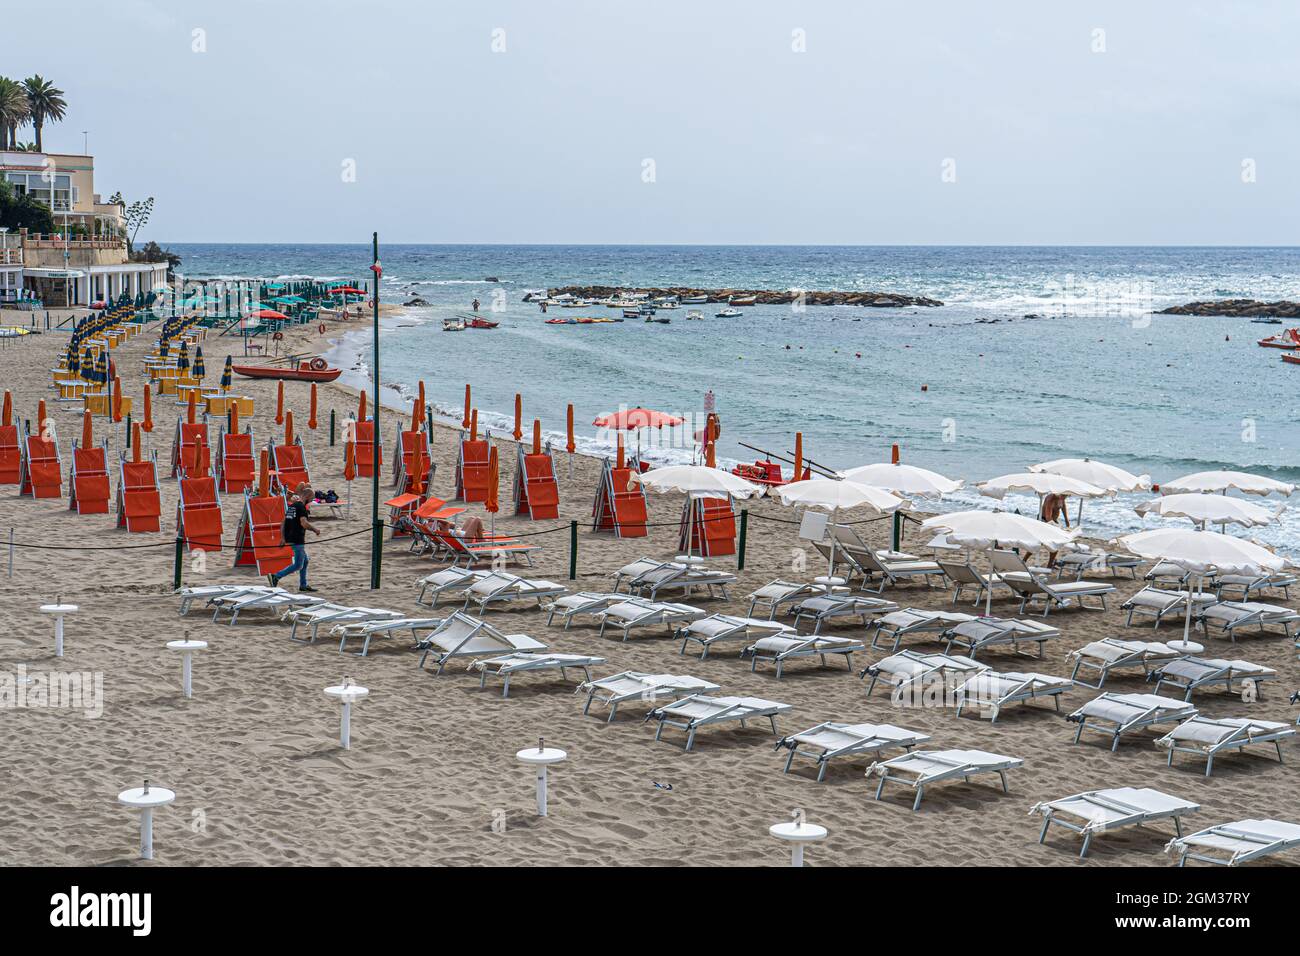 CIVITAVECHIA, LAZIO, ITALY, UK. 16 September, 2021.  A  long line of parasols and lounge chairs on  beach in Civitavecchia, North of Rome.  The UK government  has confirmed a new simplified traffic light  travel system with a single red list categorising countries as either go or no-go.current international travel traffic light system — which splits countries into red, amber and green lists according to their Covid risk level is to be scrapped.  Credit: amer ghazzal/Alamy Live News Stock Photo